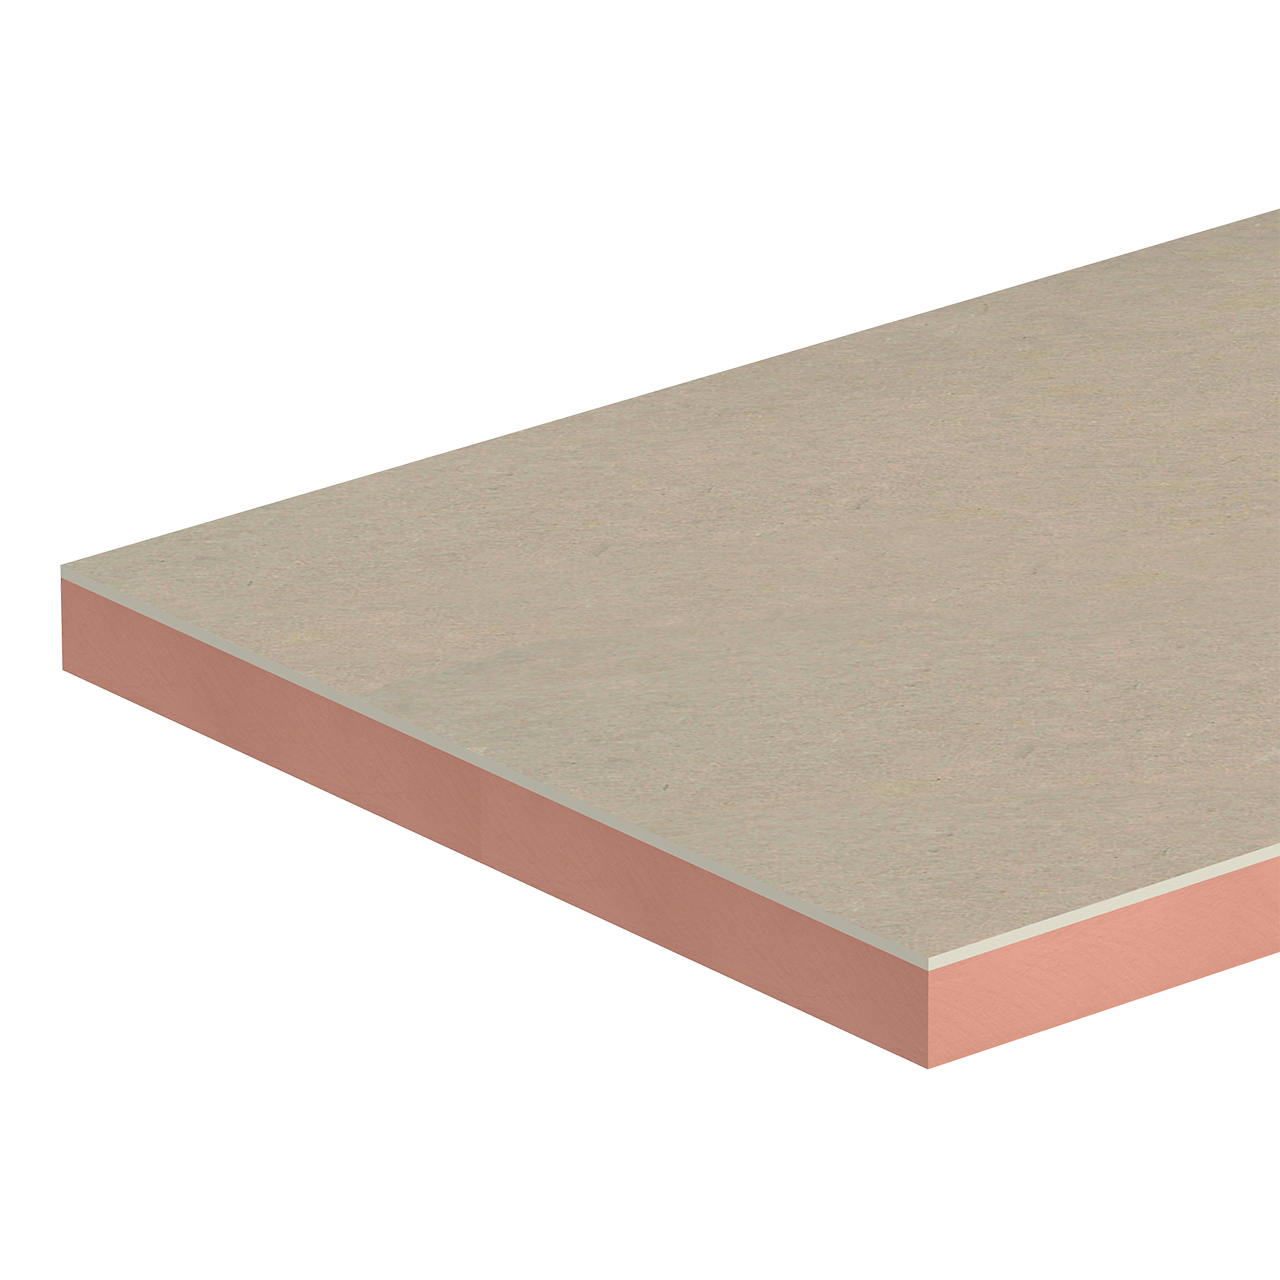 Kingspan Kooltherm K118 Insulated Plasterboard 2400x1200mm (Pack of 14) Thickness 45mm